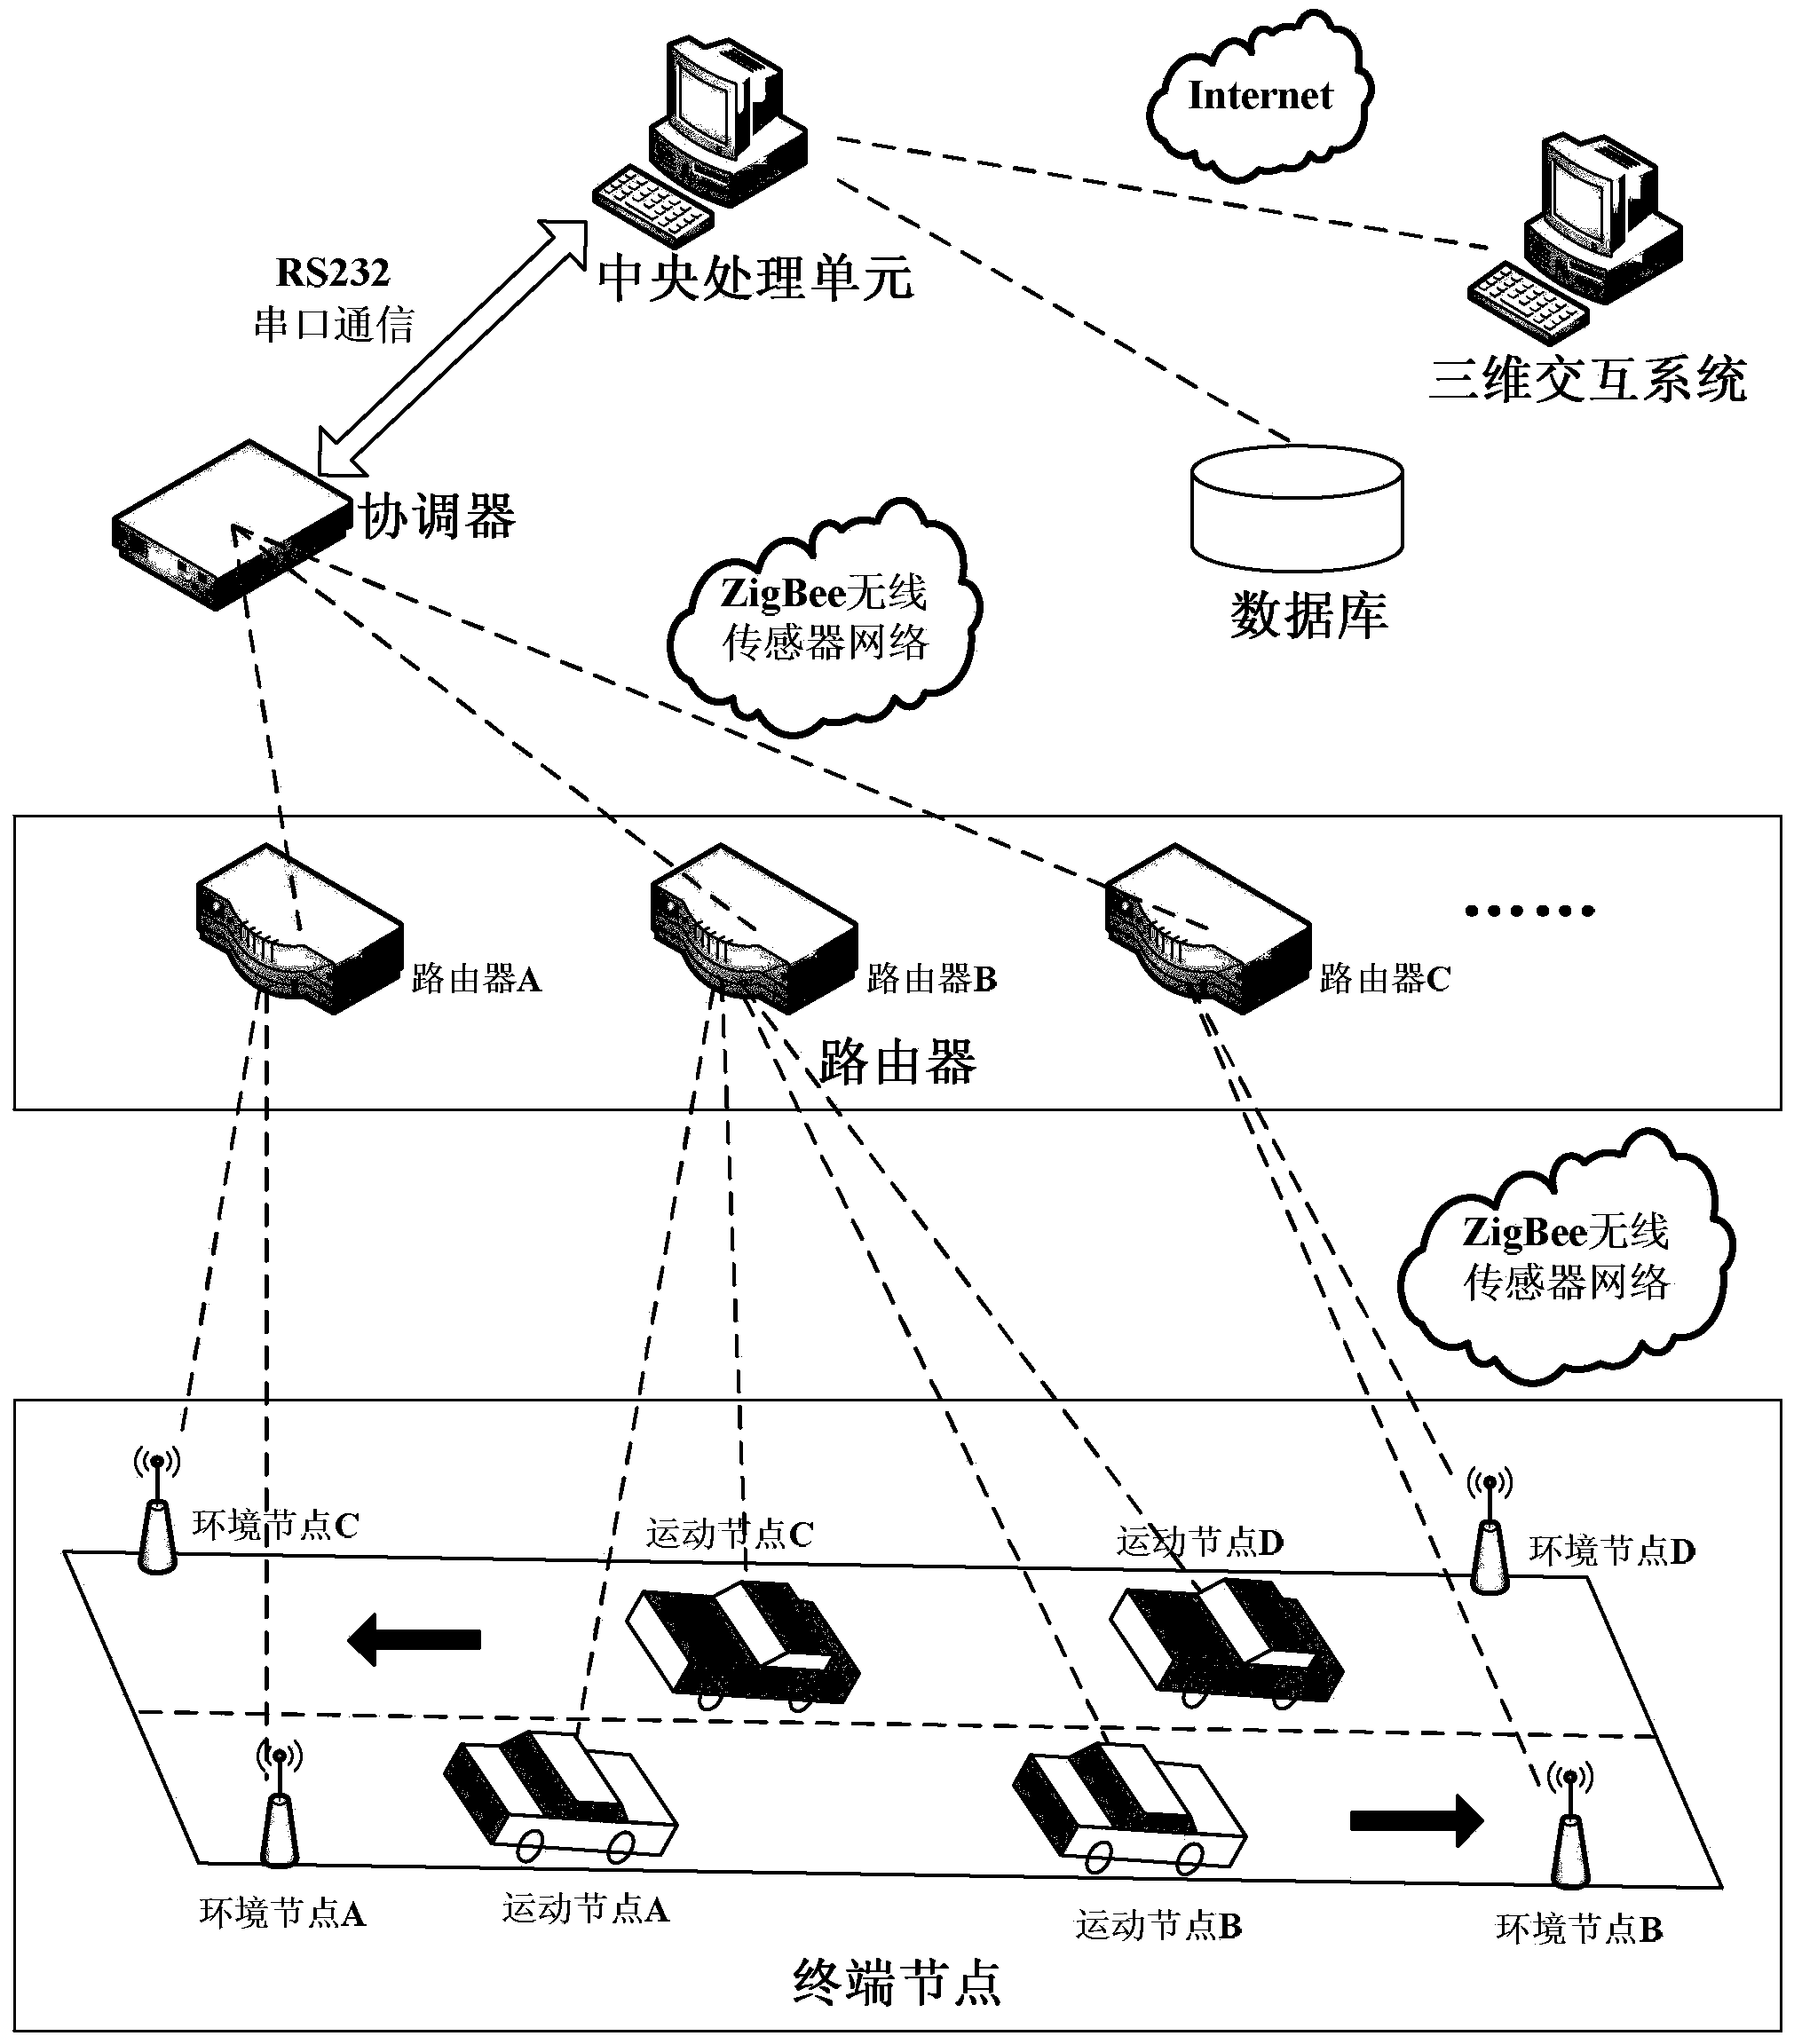 Three-dimensional microform intelligent-traffic management system based on internet of things